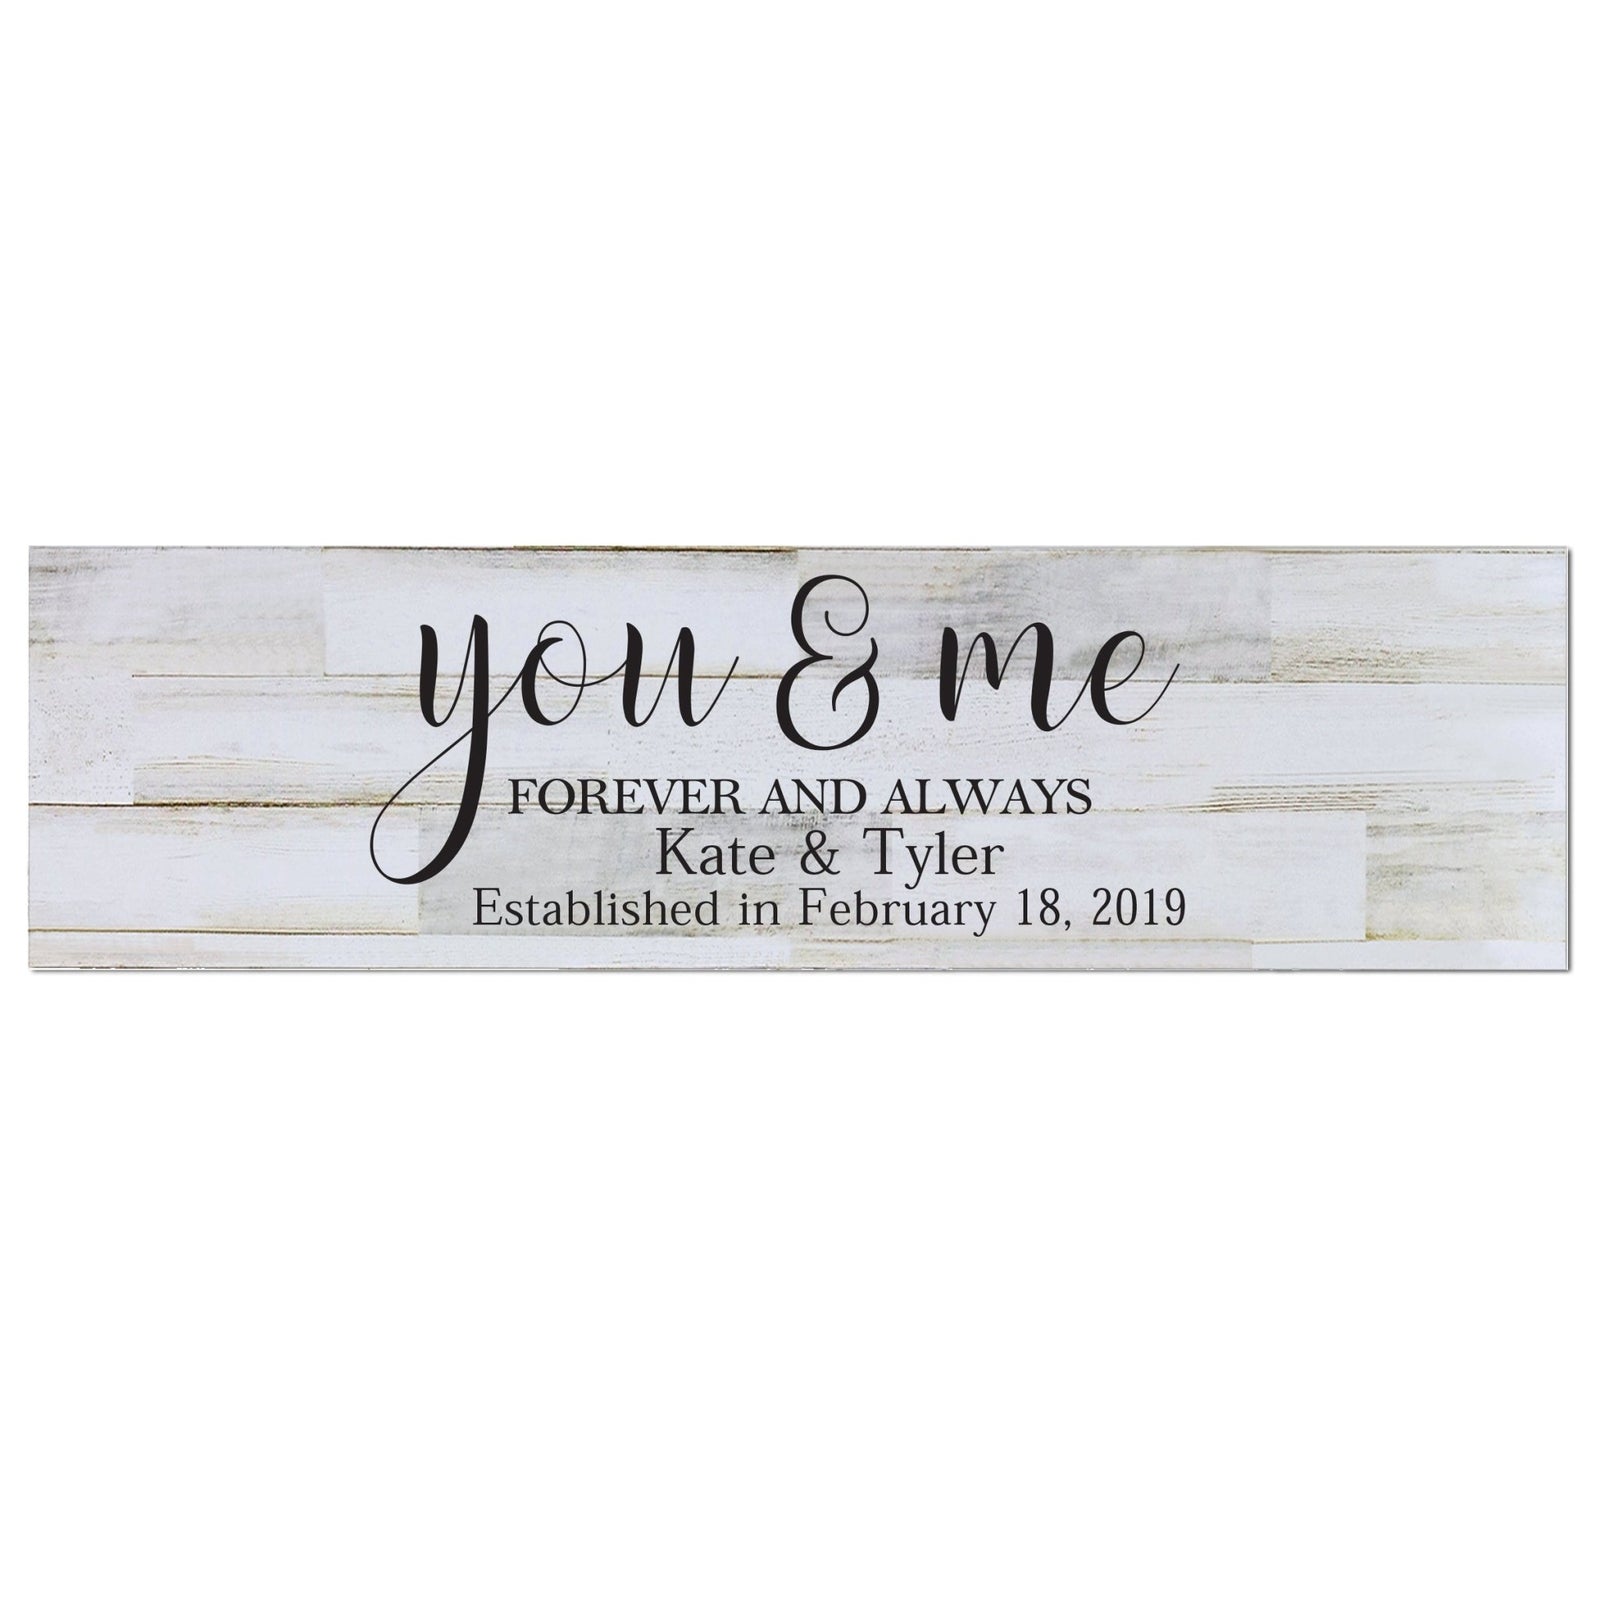 Personalized Wall Decor Family Established Signs - You & Me - LifeSong Milestones